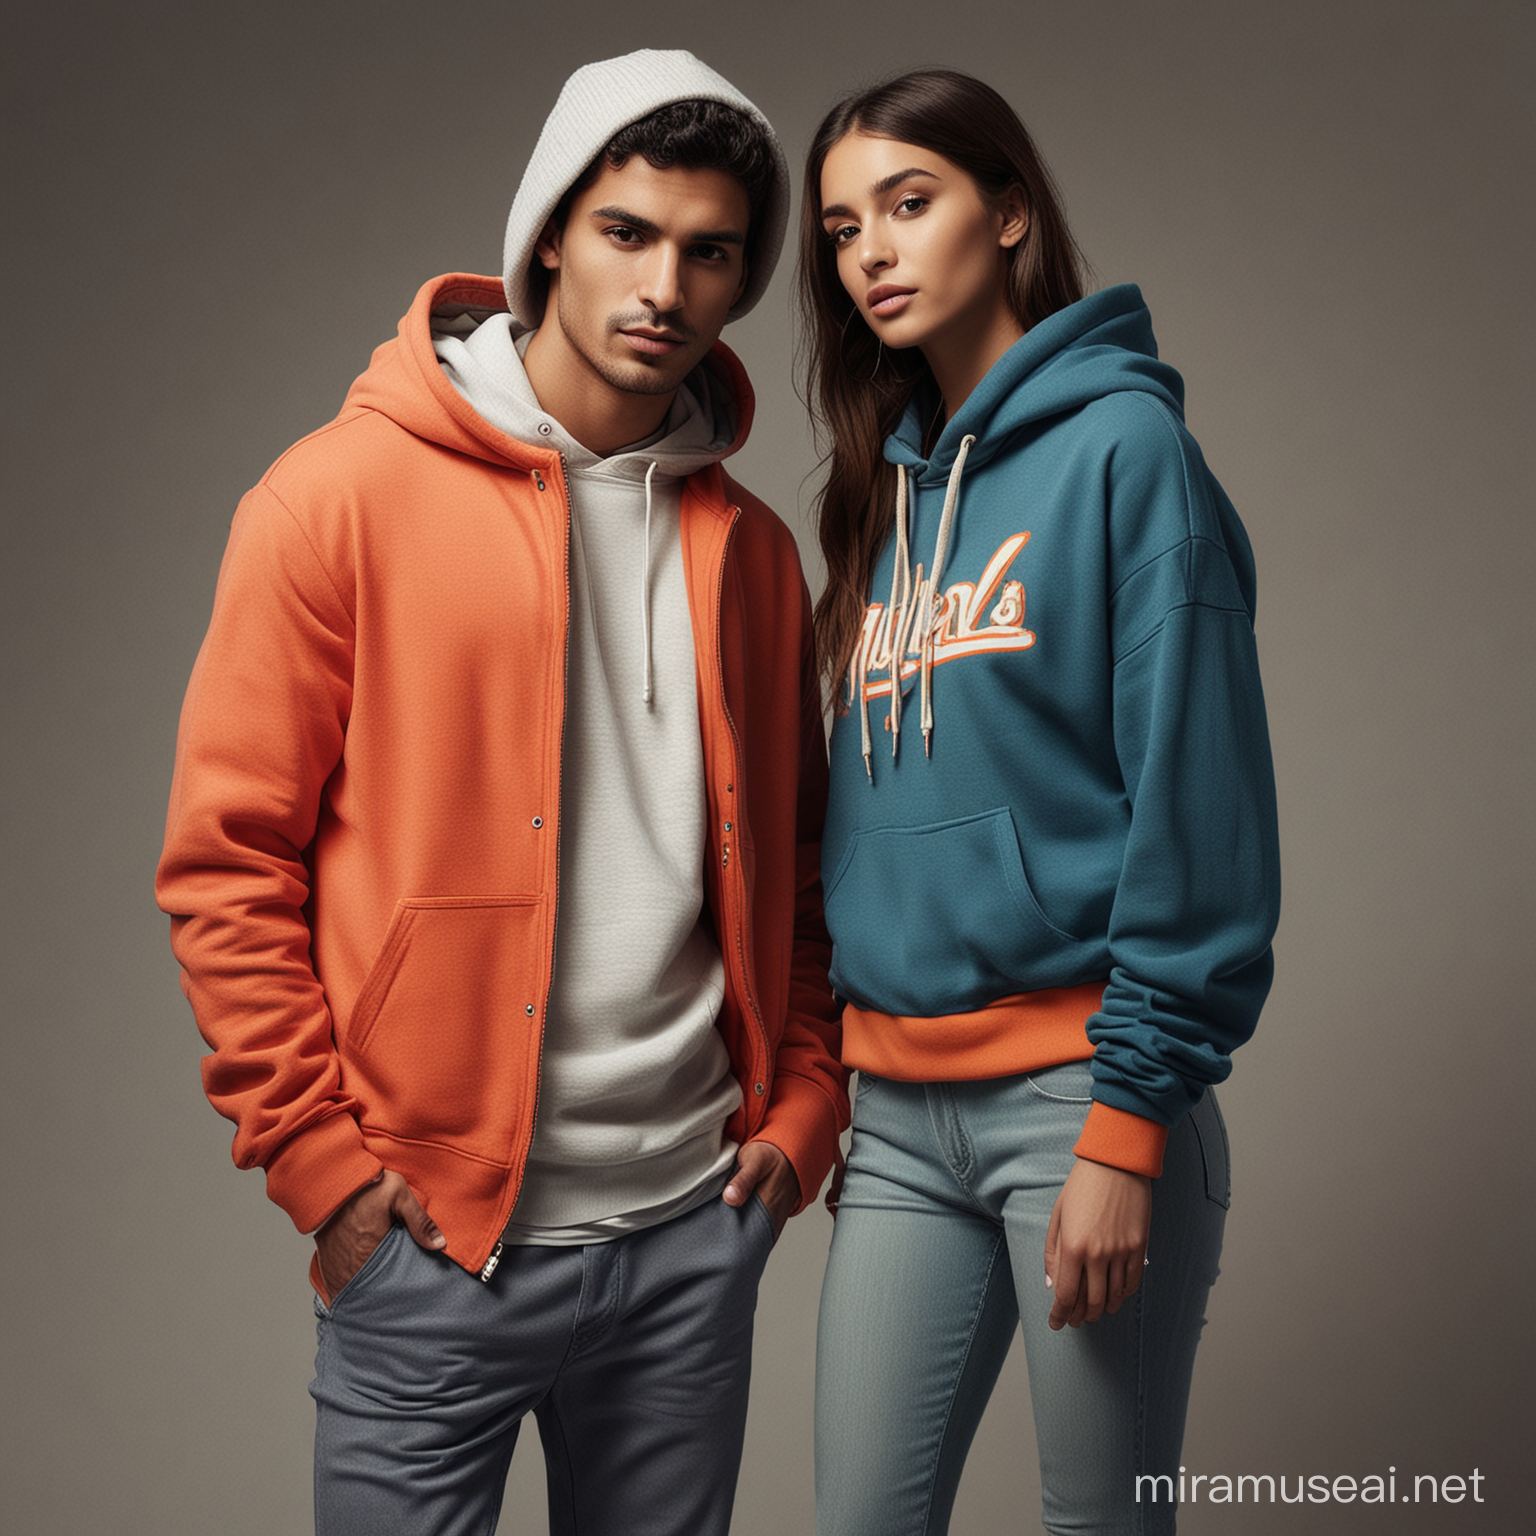 Create a detailed image of a modern fashion scene. Include a Hispanic woman and a Middle-Eastern man standing close together, illustrating a sense of intimacy and unity. They're both sporting hoodies in rich, complementary colors that exude comfort and style. The image should offer exceptional clarity and sharpness, making every detail appreciable. Let the lighting emphasize the texture of the fabric, highlighting its softness and warmth. Remember, it's not just about the contemporary fashion but also about capturing the timeless connection between these two individuals.